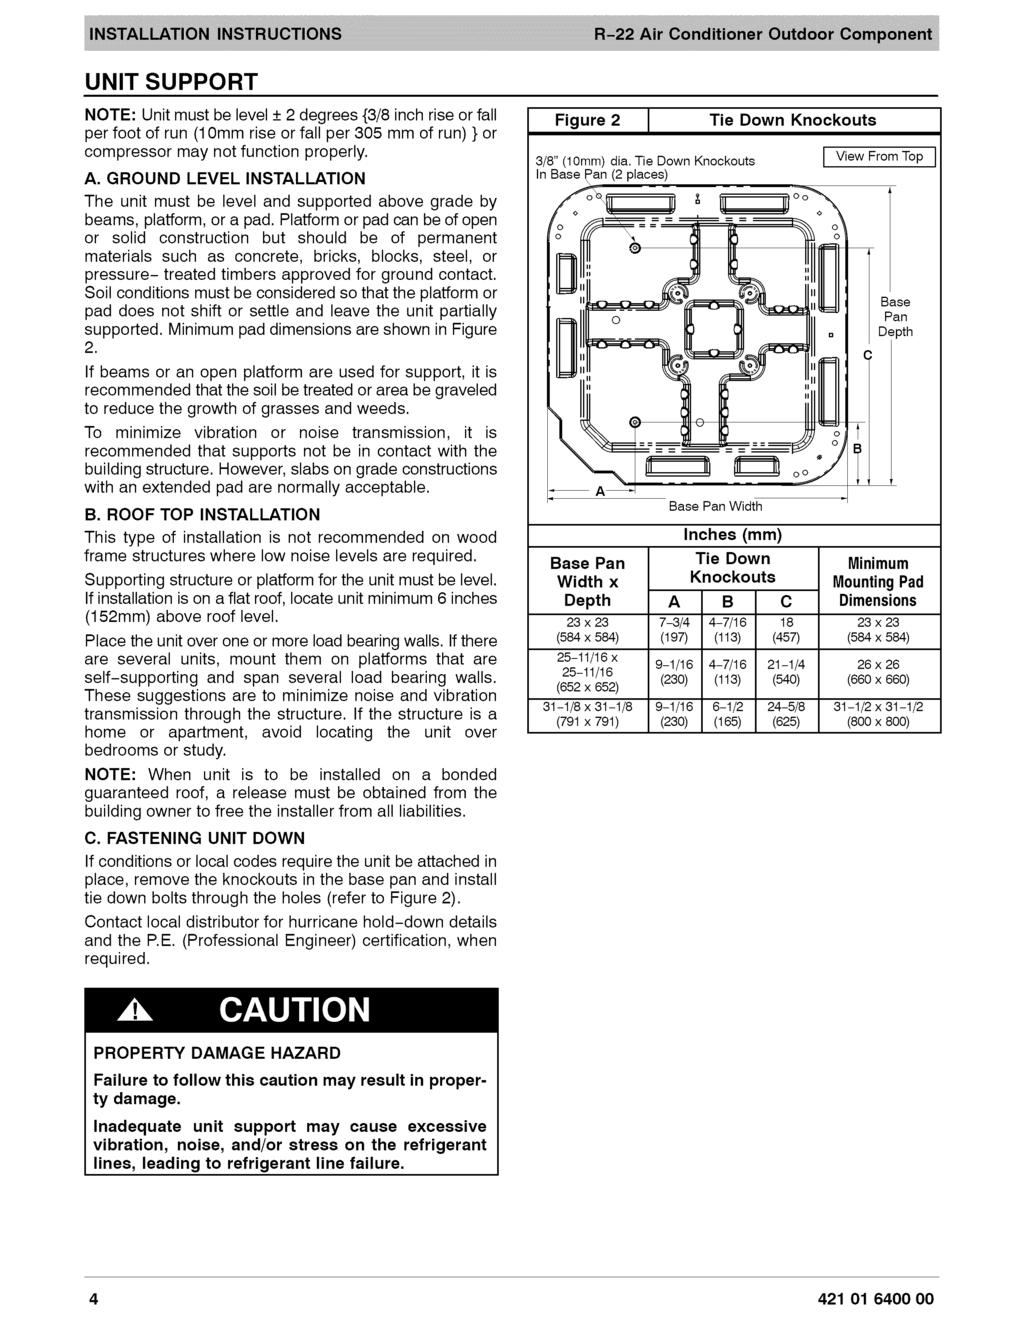 UNIT SUPPORT NOTE: Unit must be level + 2 degrees {3/8 inch rise or fall per foot of run (10mm rise or fall per 305 mm of run) } or compressor may not function properly. A.